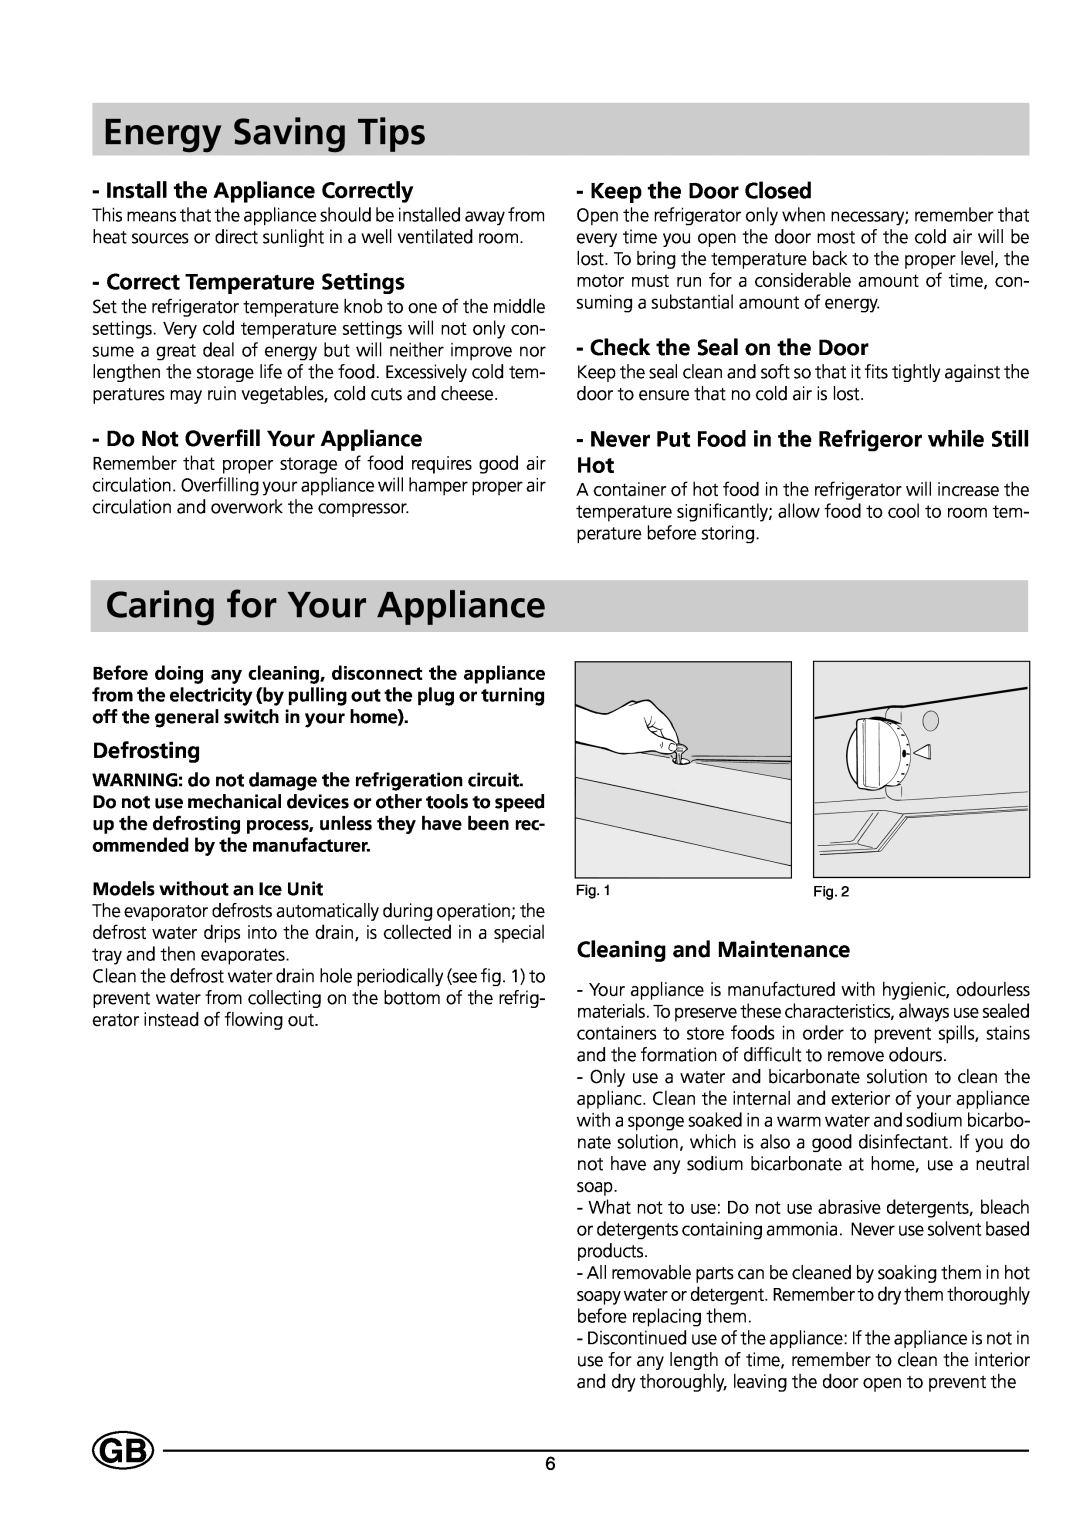 Indesit GSE 160 UK Energy Saving Tips, Caring for Your Appliance, Install the Appliance Correctly, Keep the Door Closed 